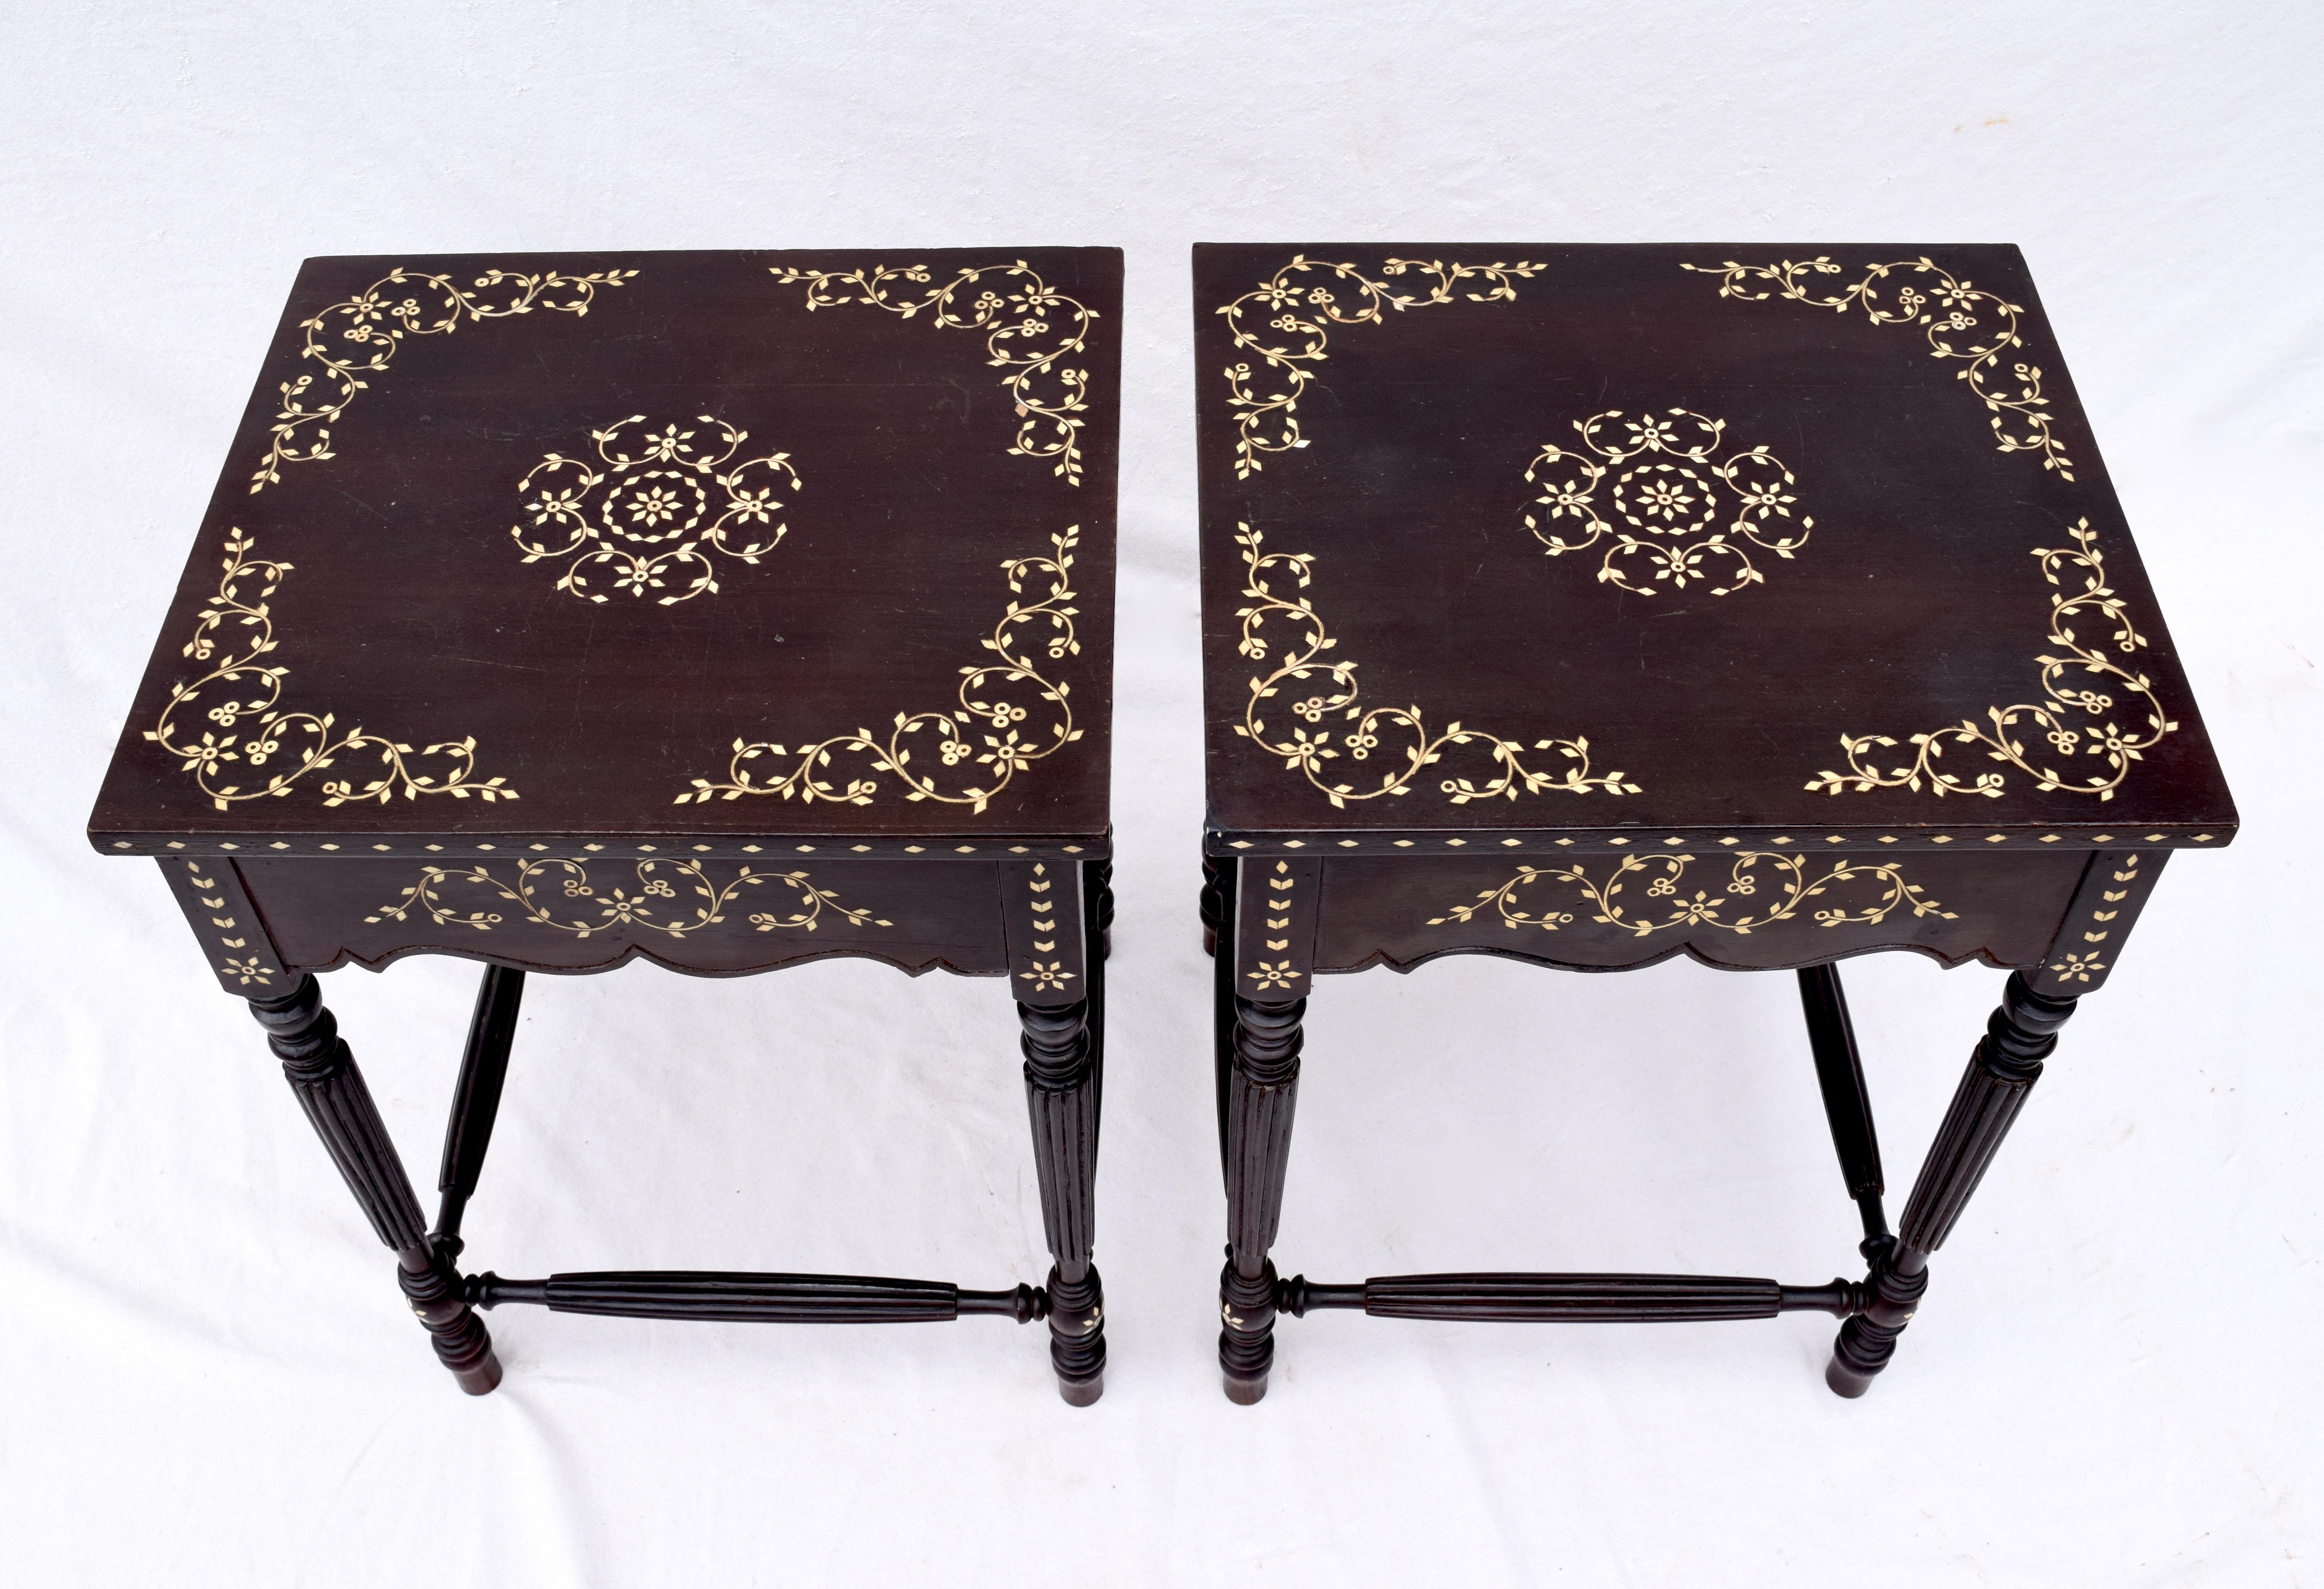 A pair of late 19th century Anglo-Indian side tables crafted in Mahogany with exotic bone inlays throughout. Beautifully maintained original finish. An unusual design with reeded turned legs & stretchers suitable in a variety of settings.